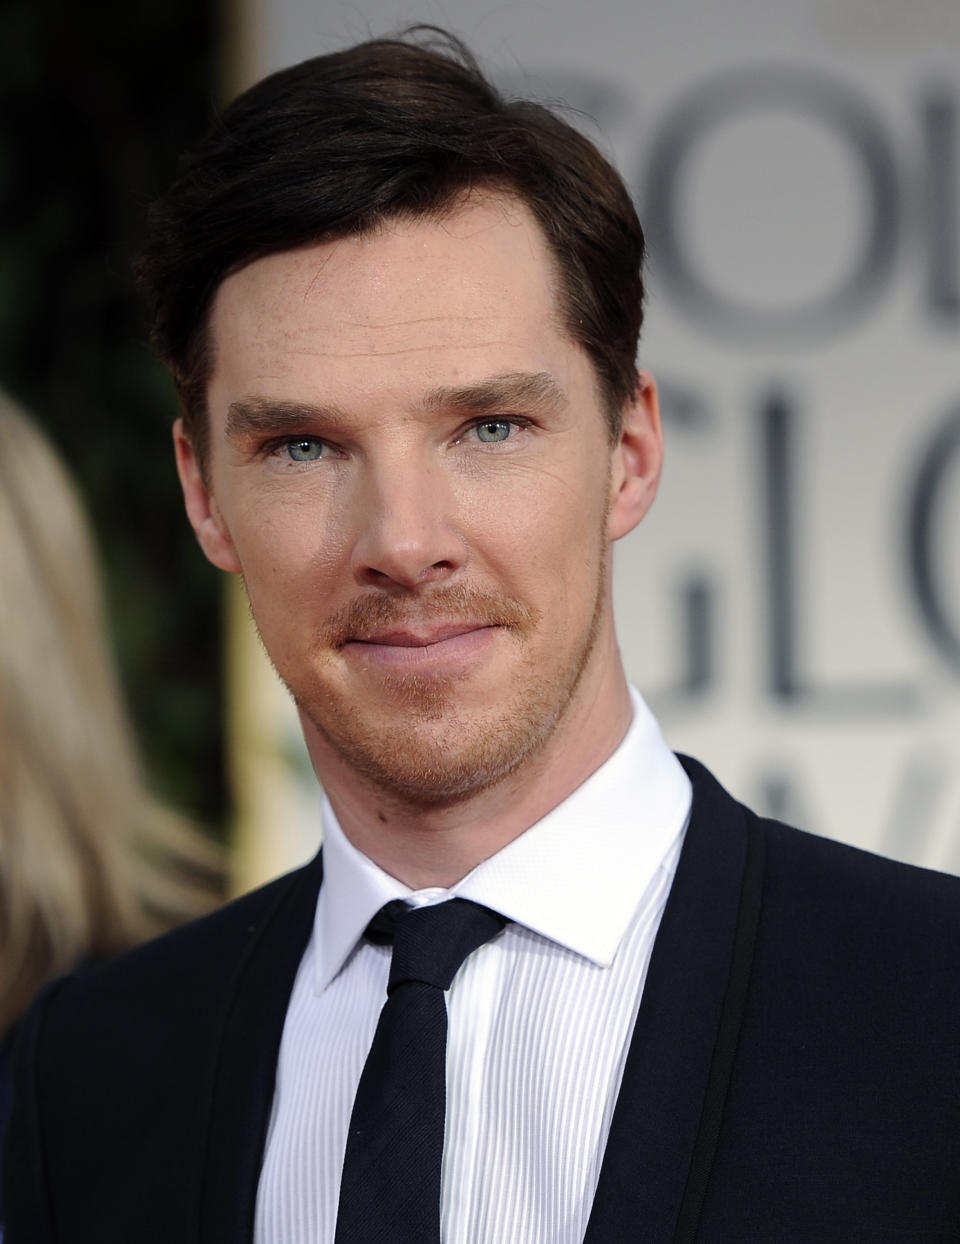 FILE - In this Sunday, Jan. 15, 2012, file photo Benedict Cumberbatch arrives on the red carpet before the 69th Annual Golden Globe Awards, in Los Angeles. For the past three decades, many Britons had hoped the rigid class system that defined their country from Dickens to “Downton Abbey” was finally dying. Now they fear that class, their old bugbear, is back on the rise. A recent Sunday Telegraph story with the headline "young, gifted and posh" said Britain's oldest private schools, such as all-male Eton and Harrow, had become a "production line of young talent," including "Homeland" star Damian Lewis, Benedict Cumberbatch of "Sherlock" and Dominic West of “The Wire.” (AP Photo/Chris Pizzello, File)